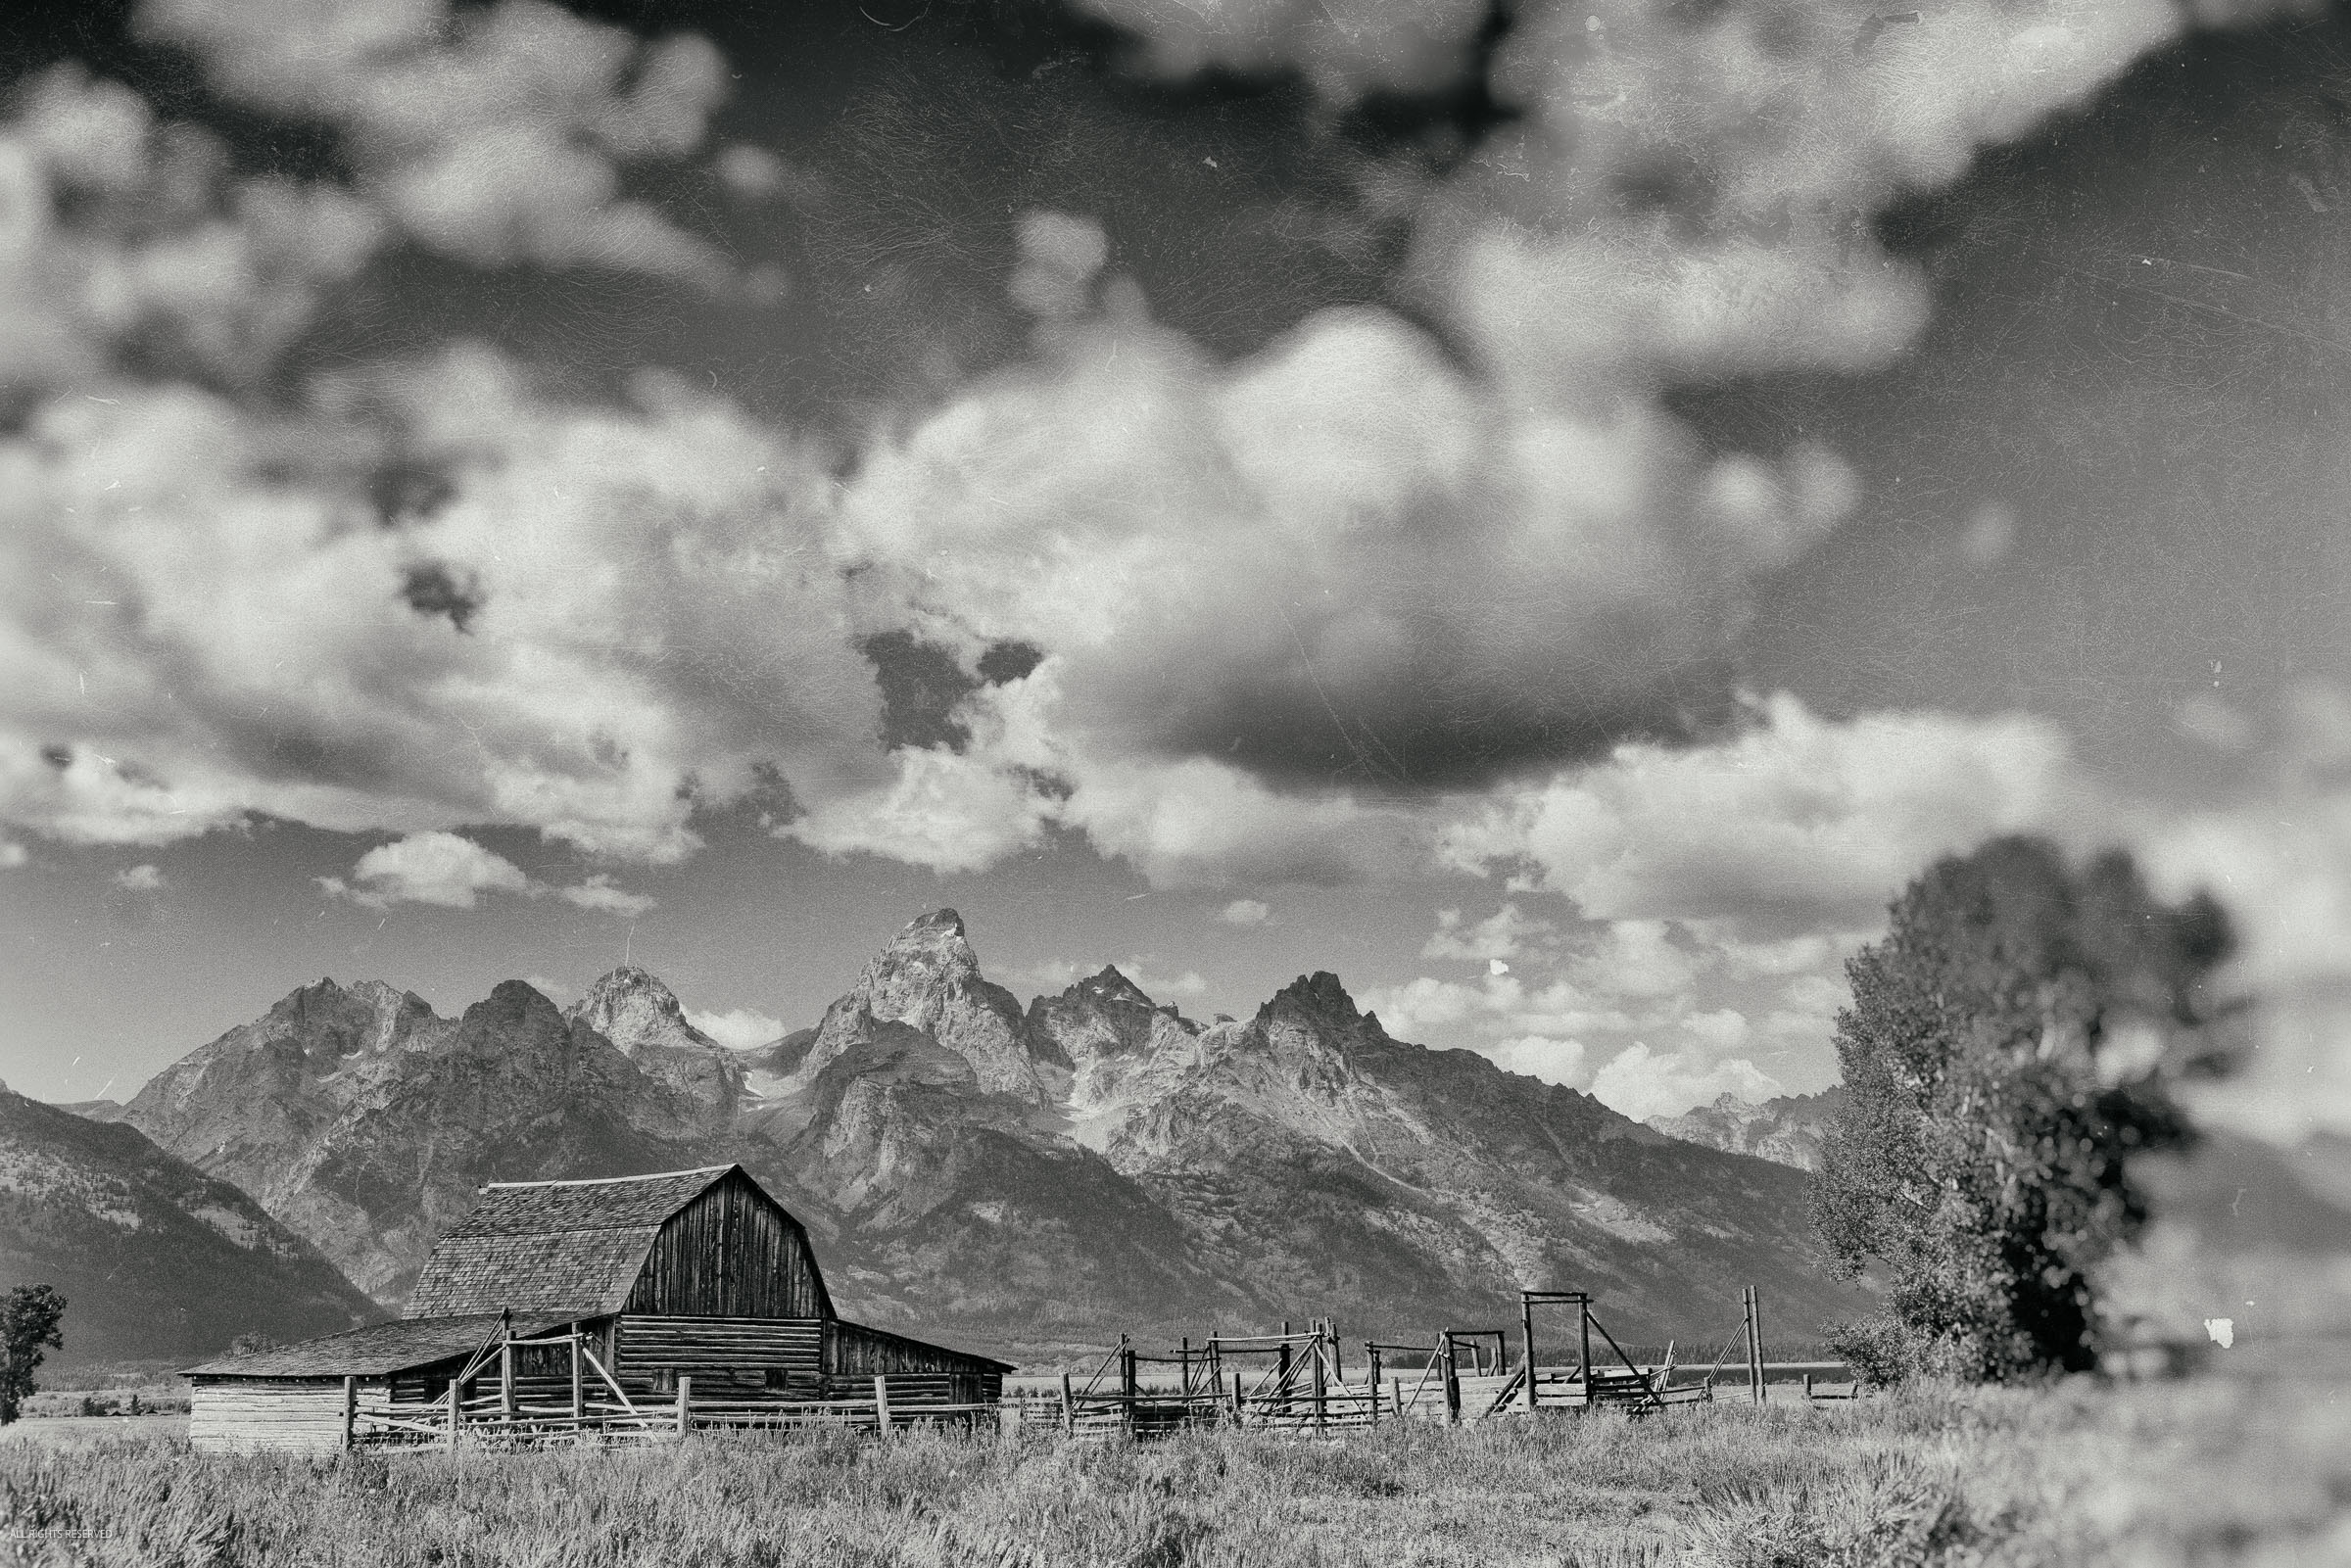 Admire the harmonious blend of history and nature in this fine art photo, featuring the iconic barns of Mormon Row set against...